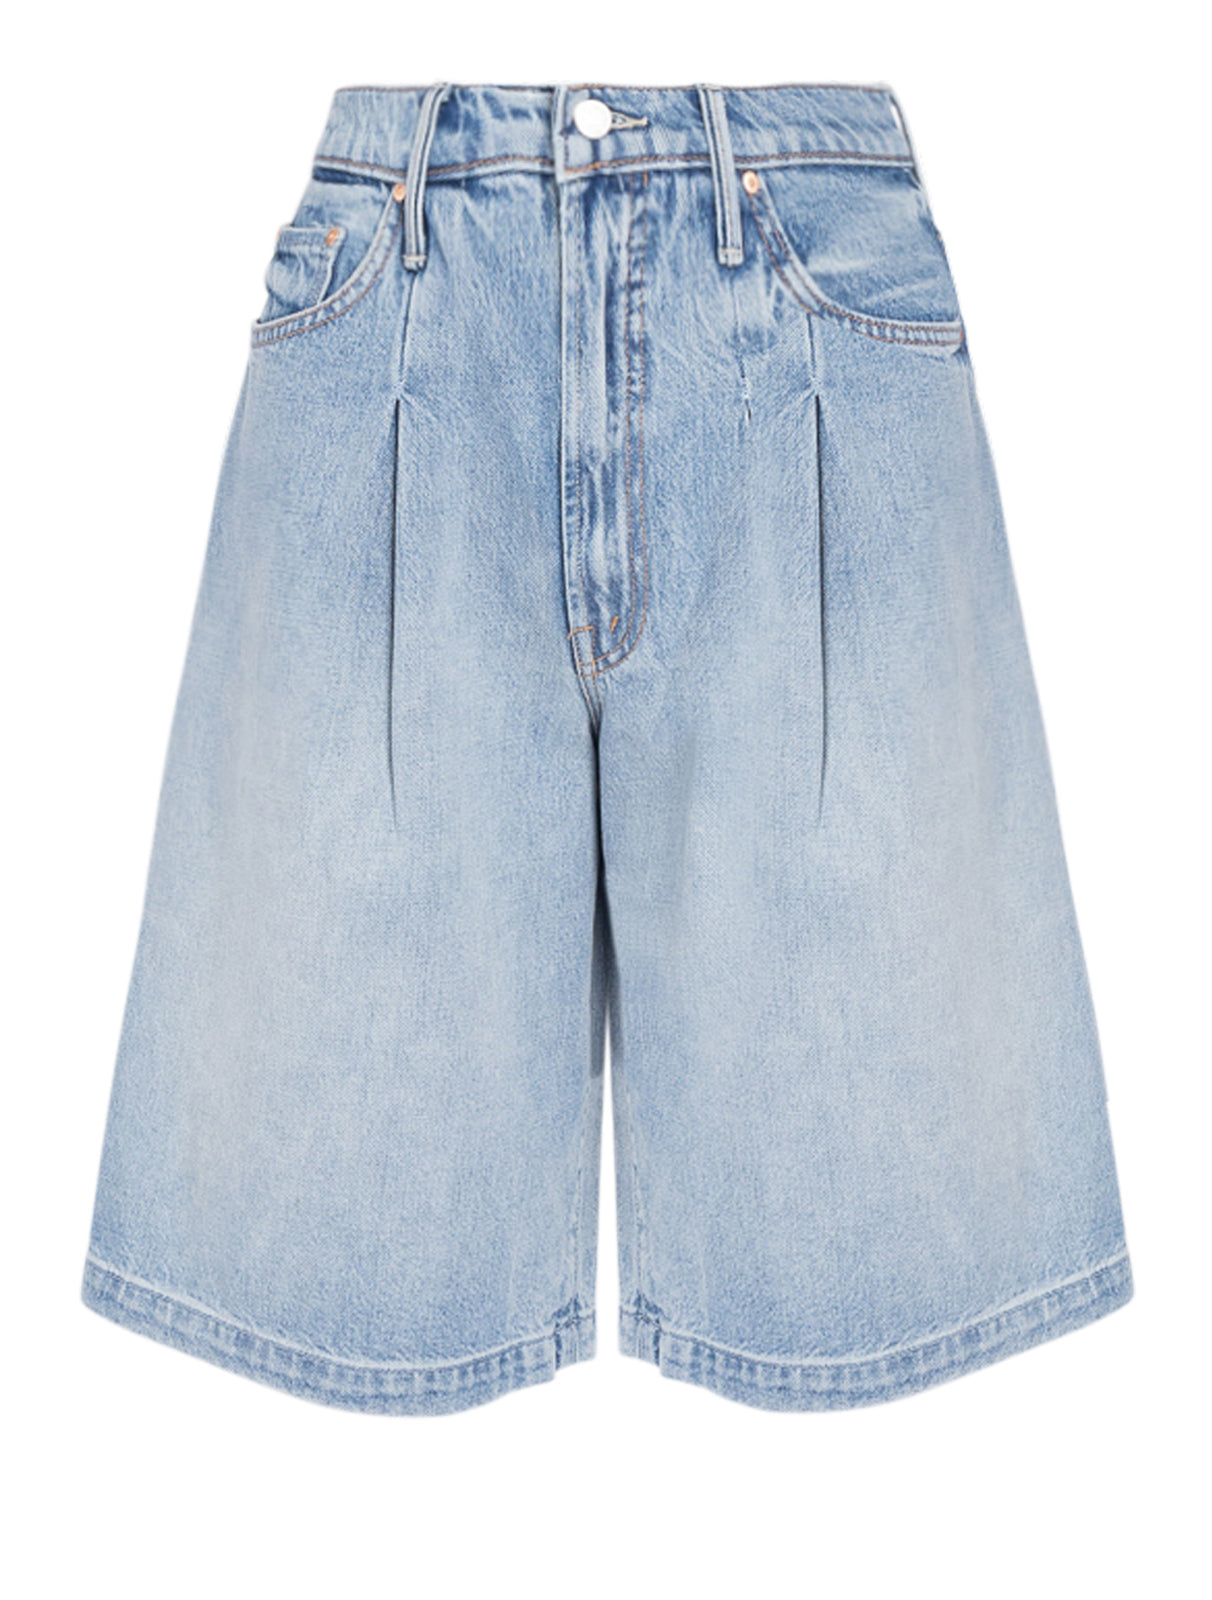 The Pleated Undercover Shorts